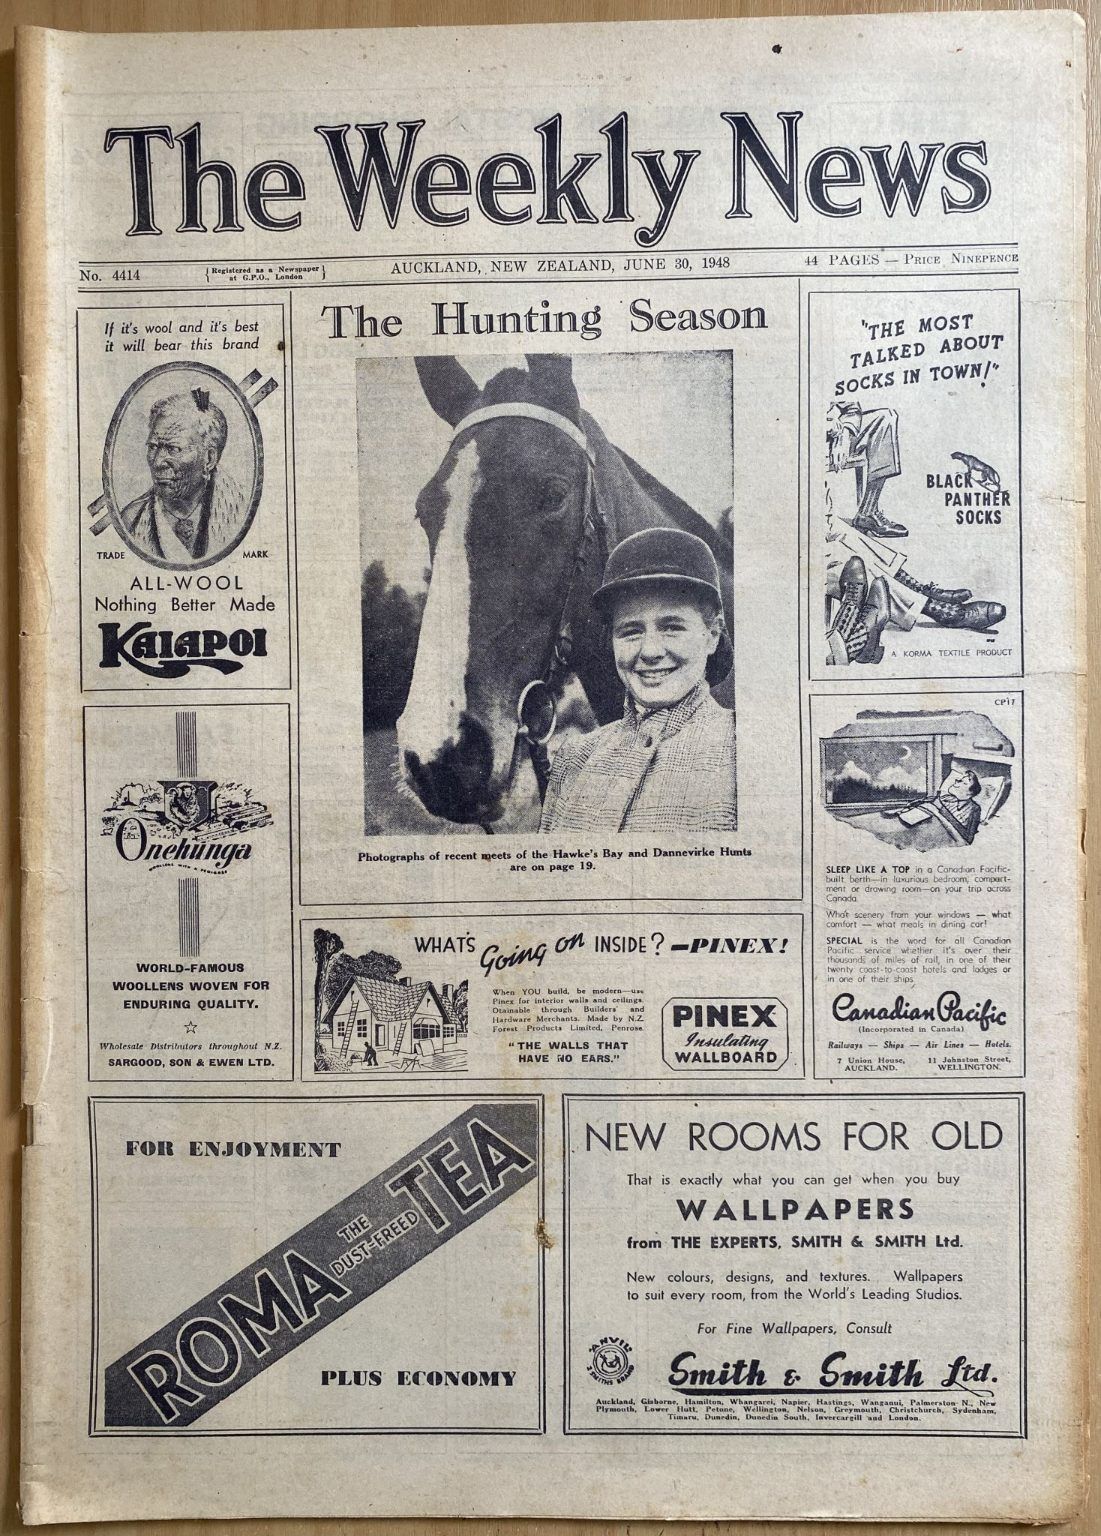 OLD NEWSPAPER: The Weekly News - No. 4414, 30 June 1948